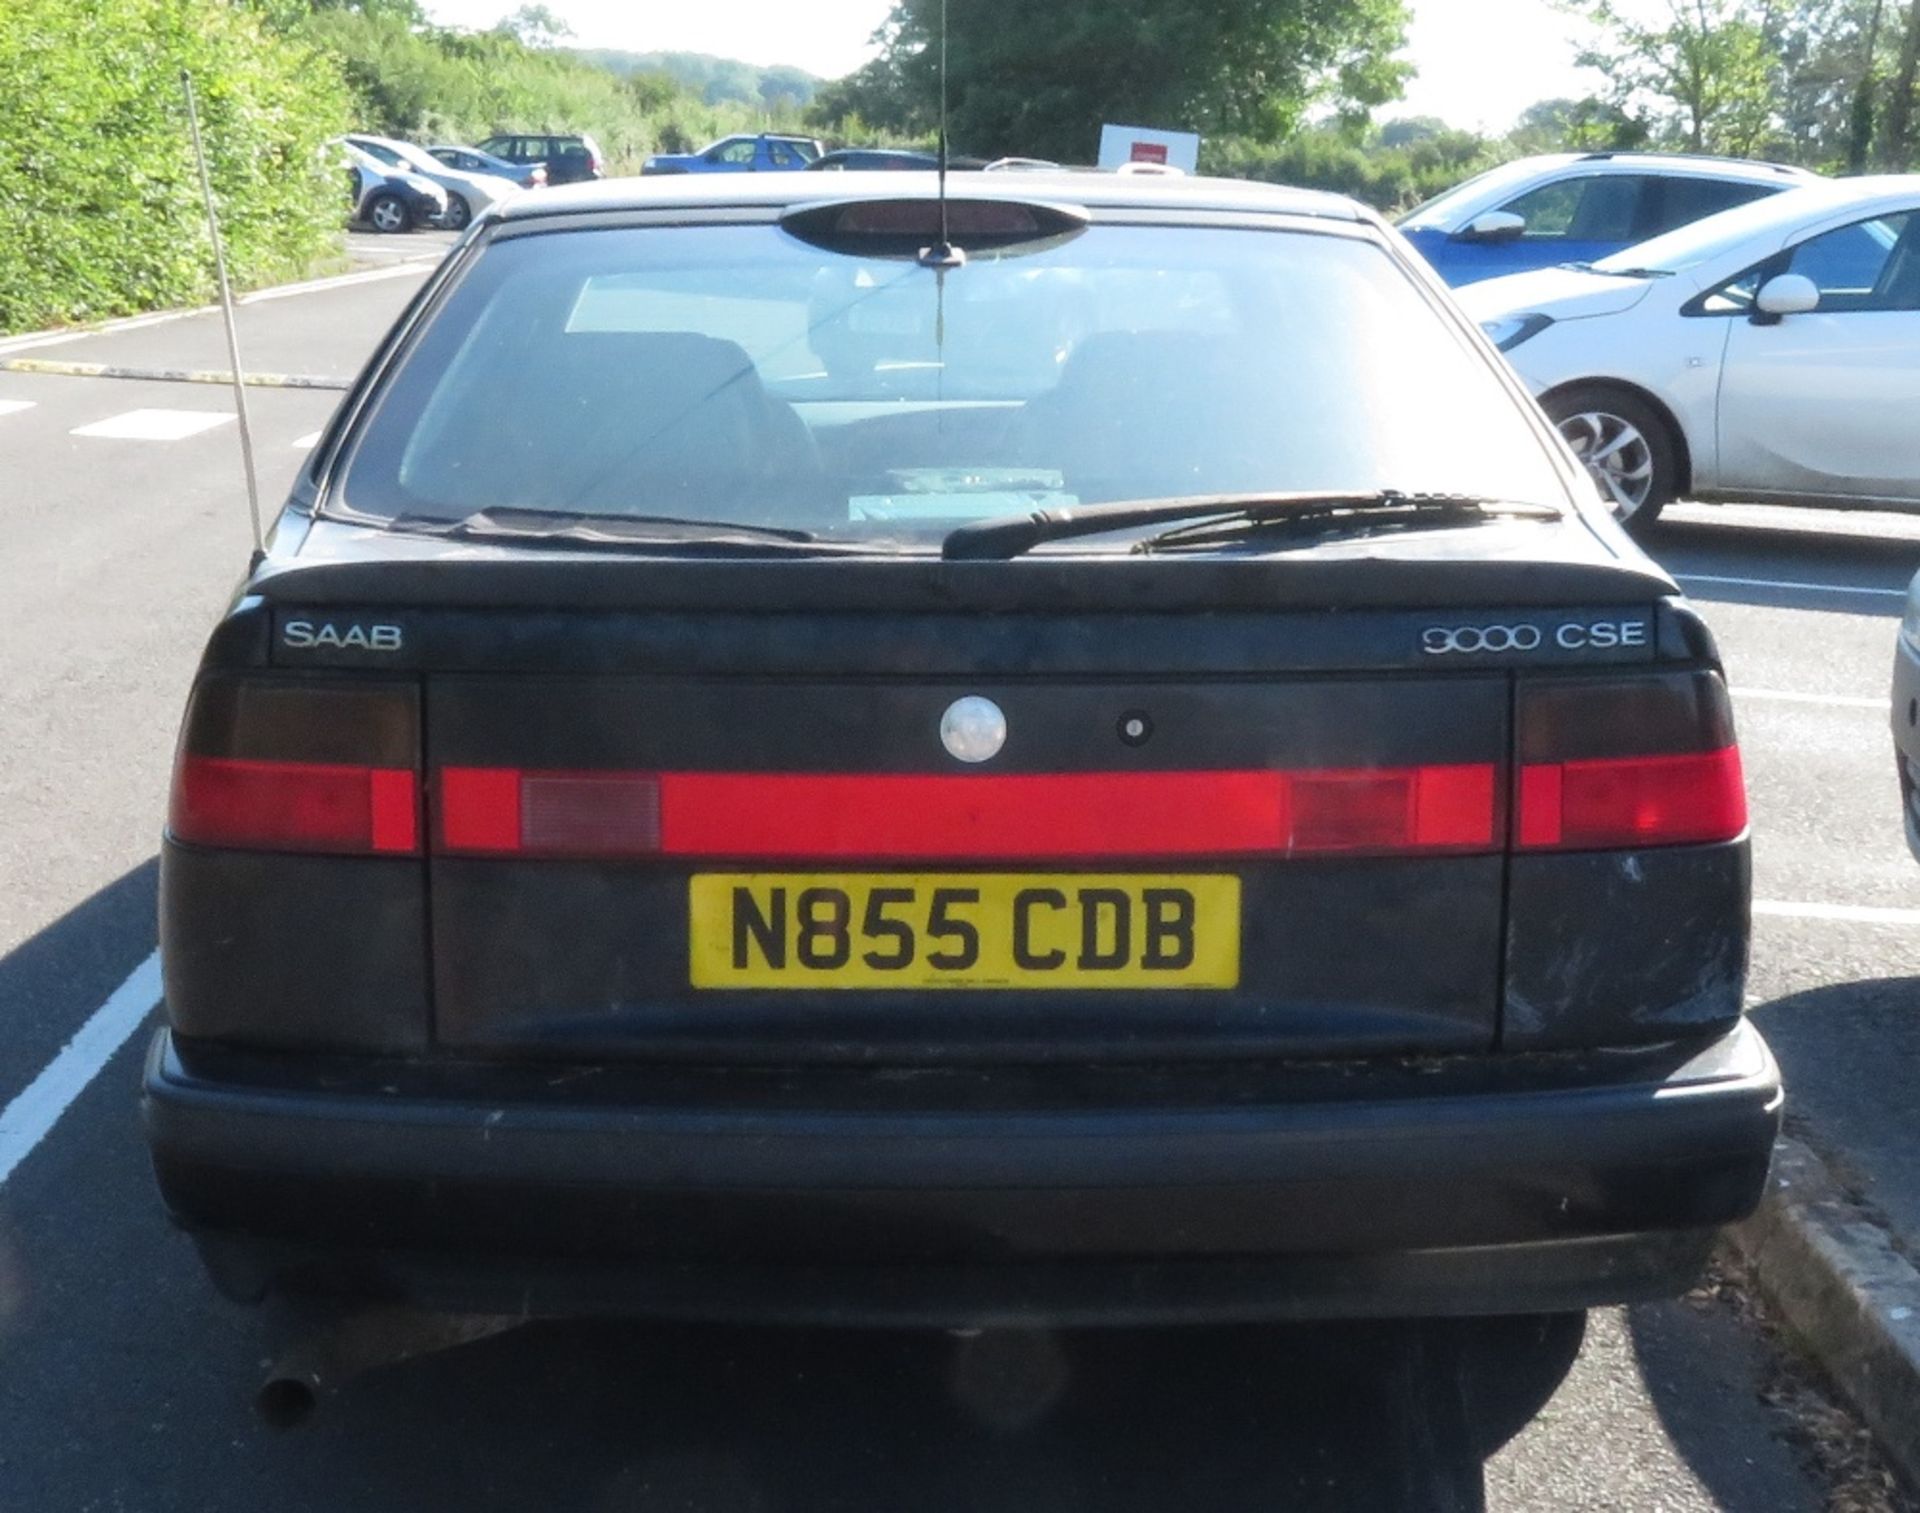 Saab 900 CSE, Reg no N855 CDB, black 4 door saloon, this vehicle has been stored in a field for many - Image 2 of 7